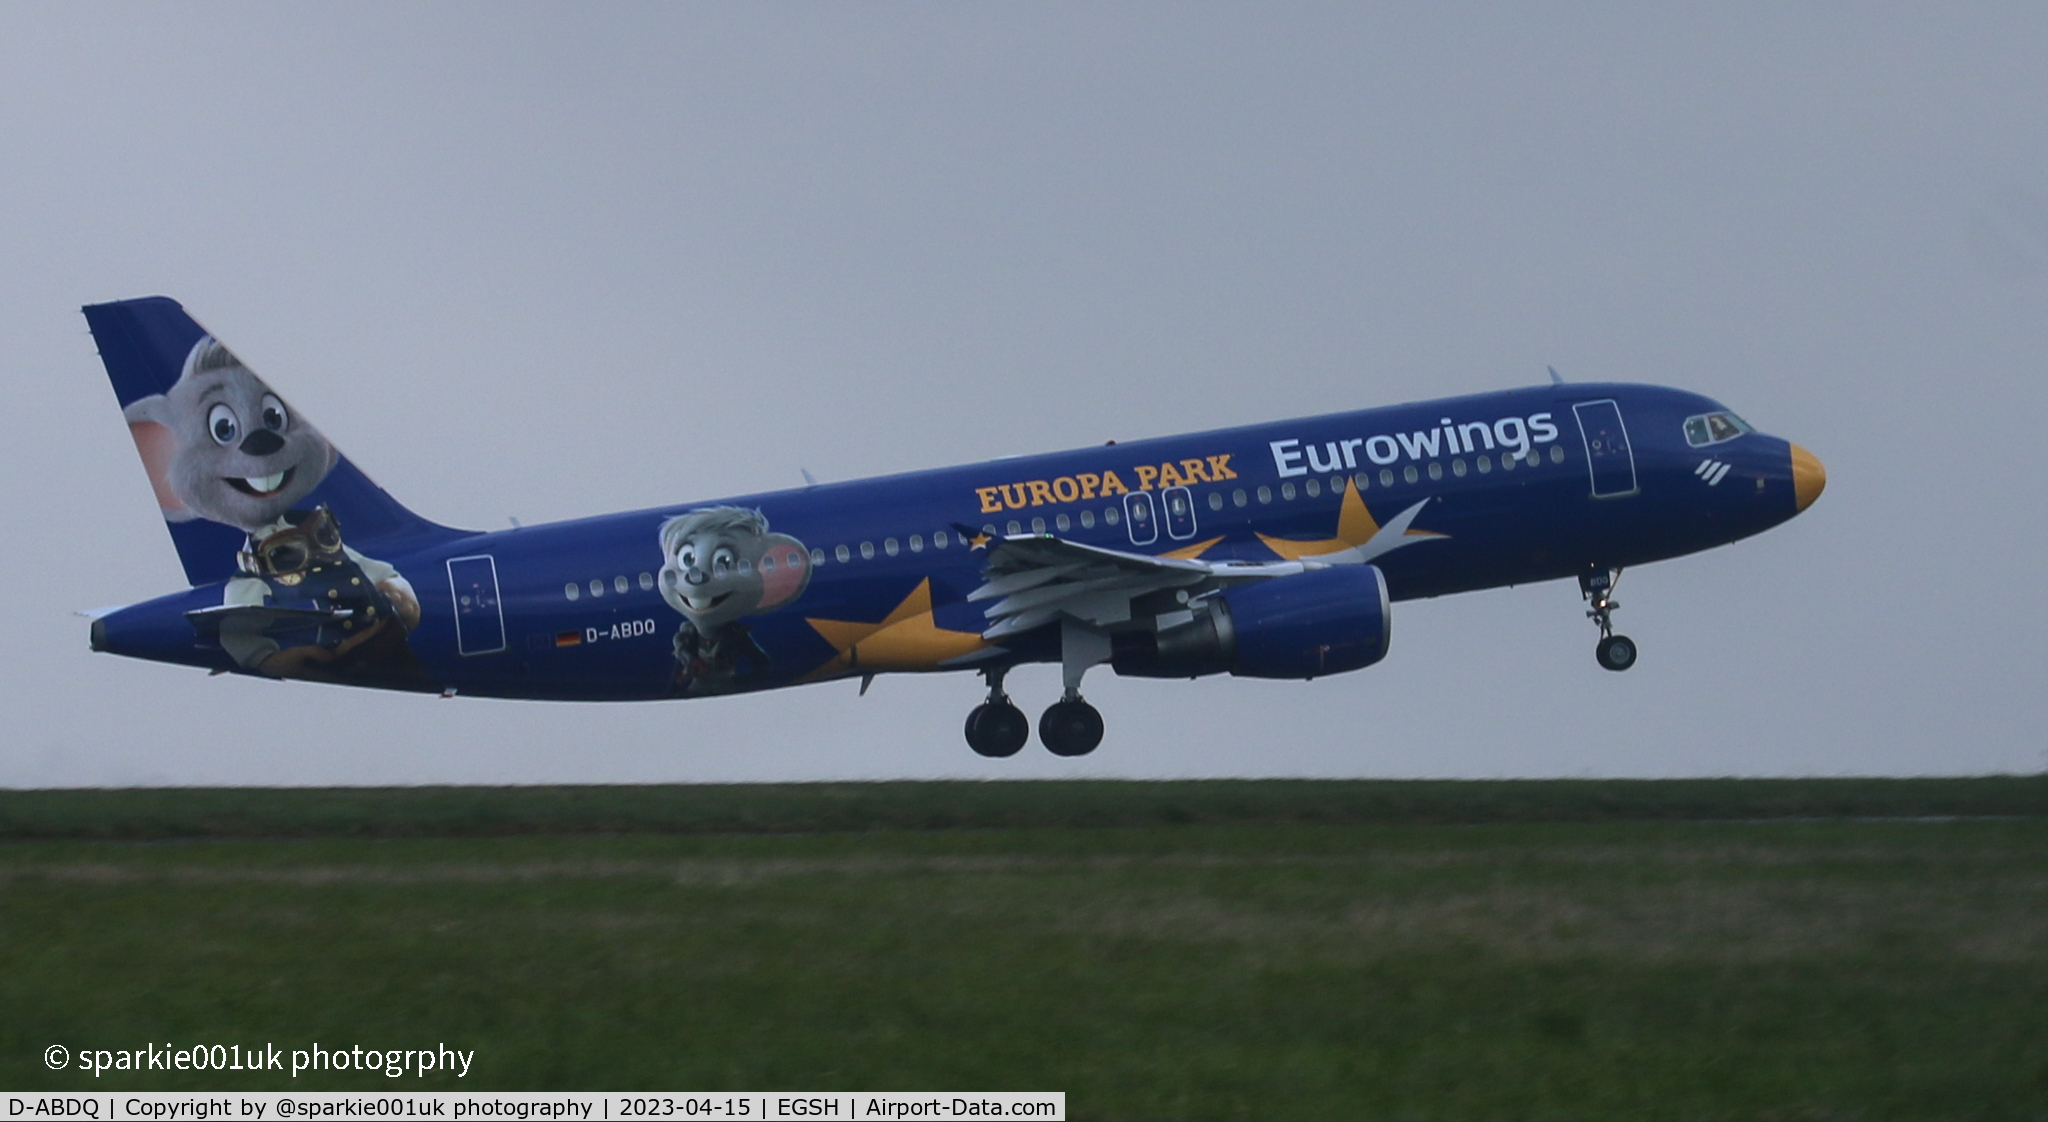 D-ABDQ, 2007 Airbus A320-214 C/N 3121, Departing Norwich following a refresh on the Europa Park livery